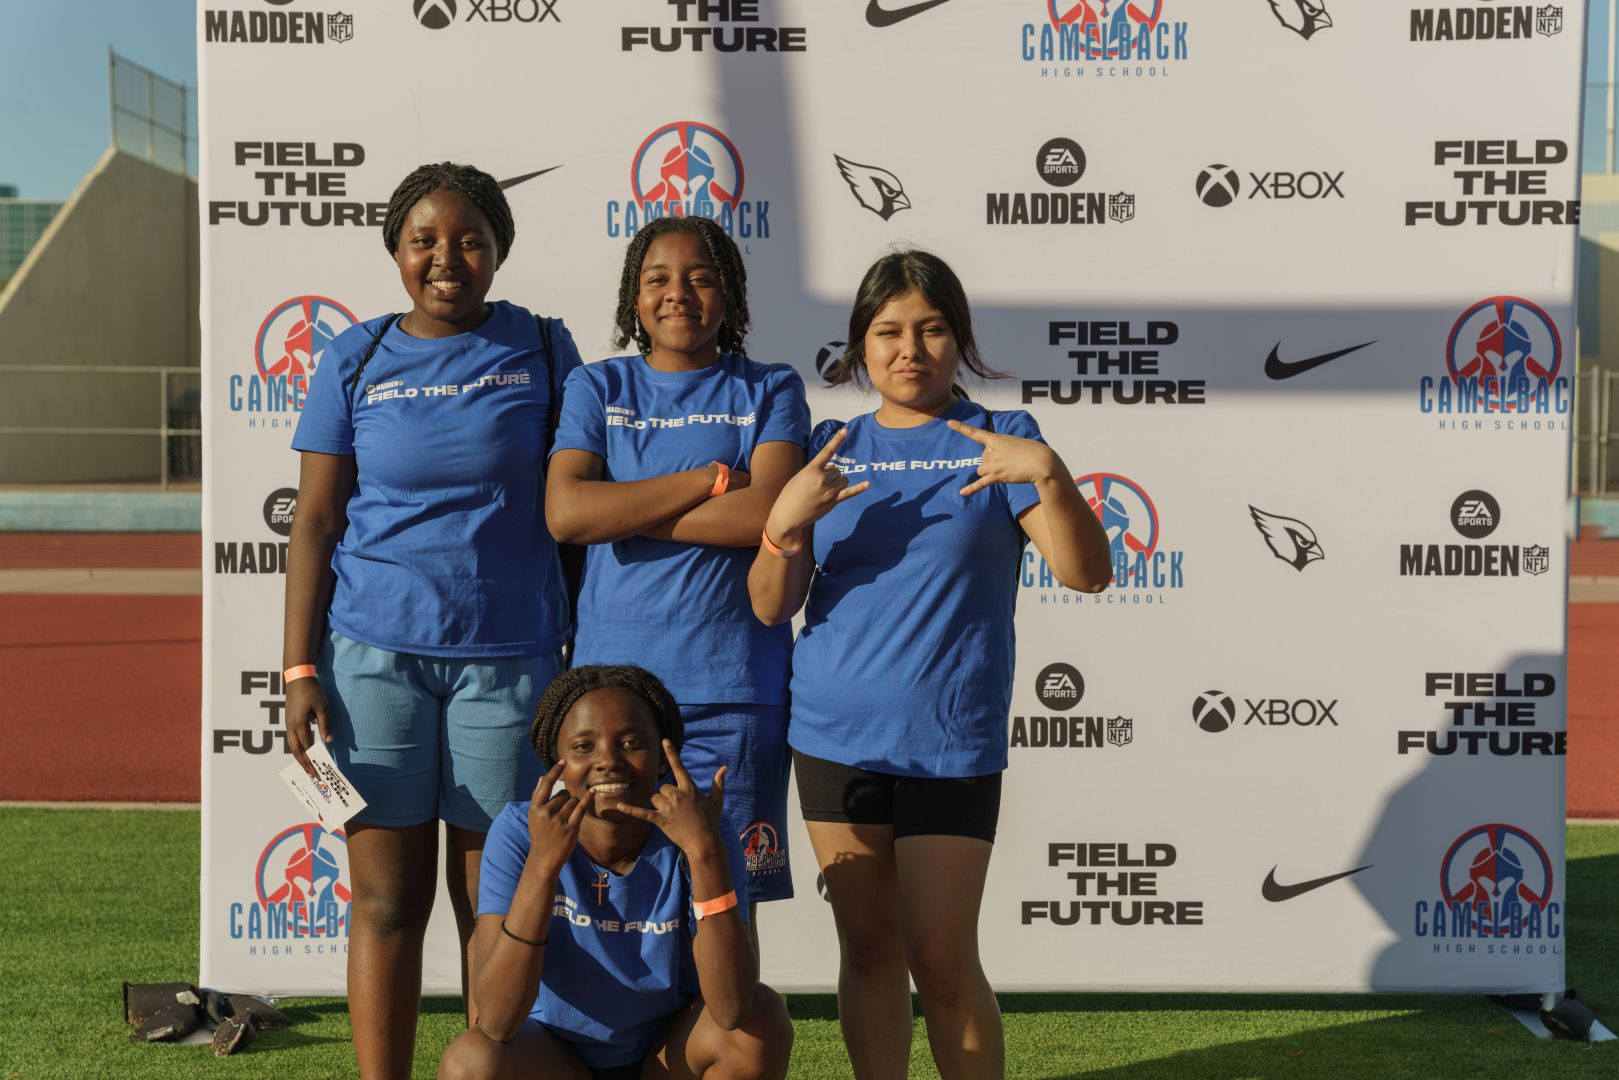 "Field the Future" Event Photo from Camelback High School